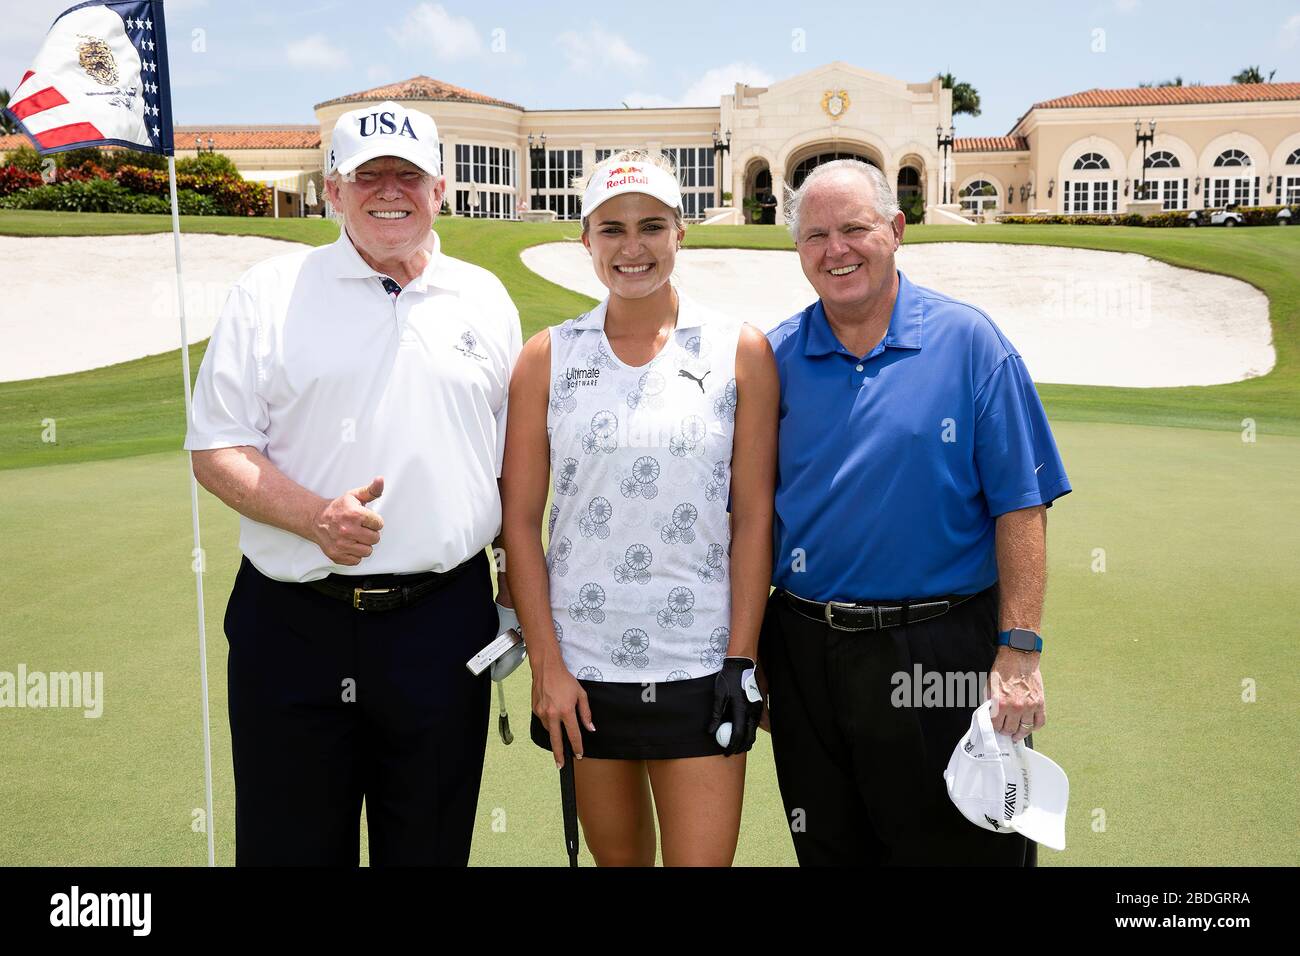 President Donald J. Trump, professional golfer Lexi Thompson and radio commentator Rush Limbaugh pose for a photo Friday, April 19, 2019, at the Trump International Golf Club in West Palm Beach, Fla. Stock Photo